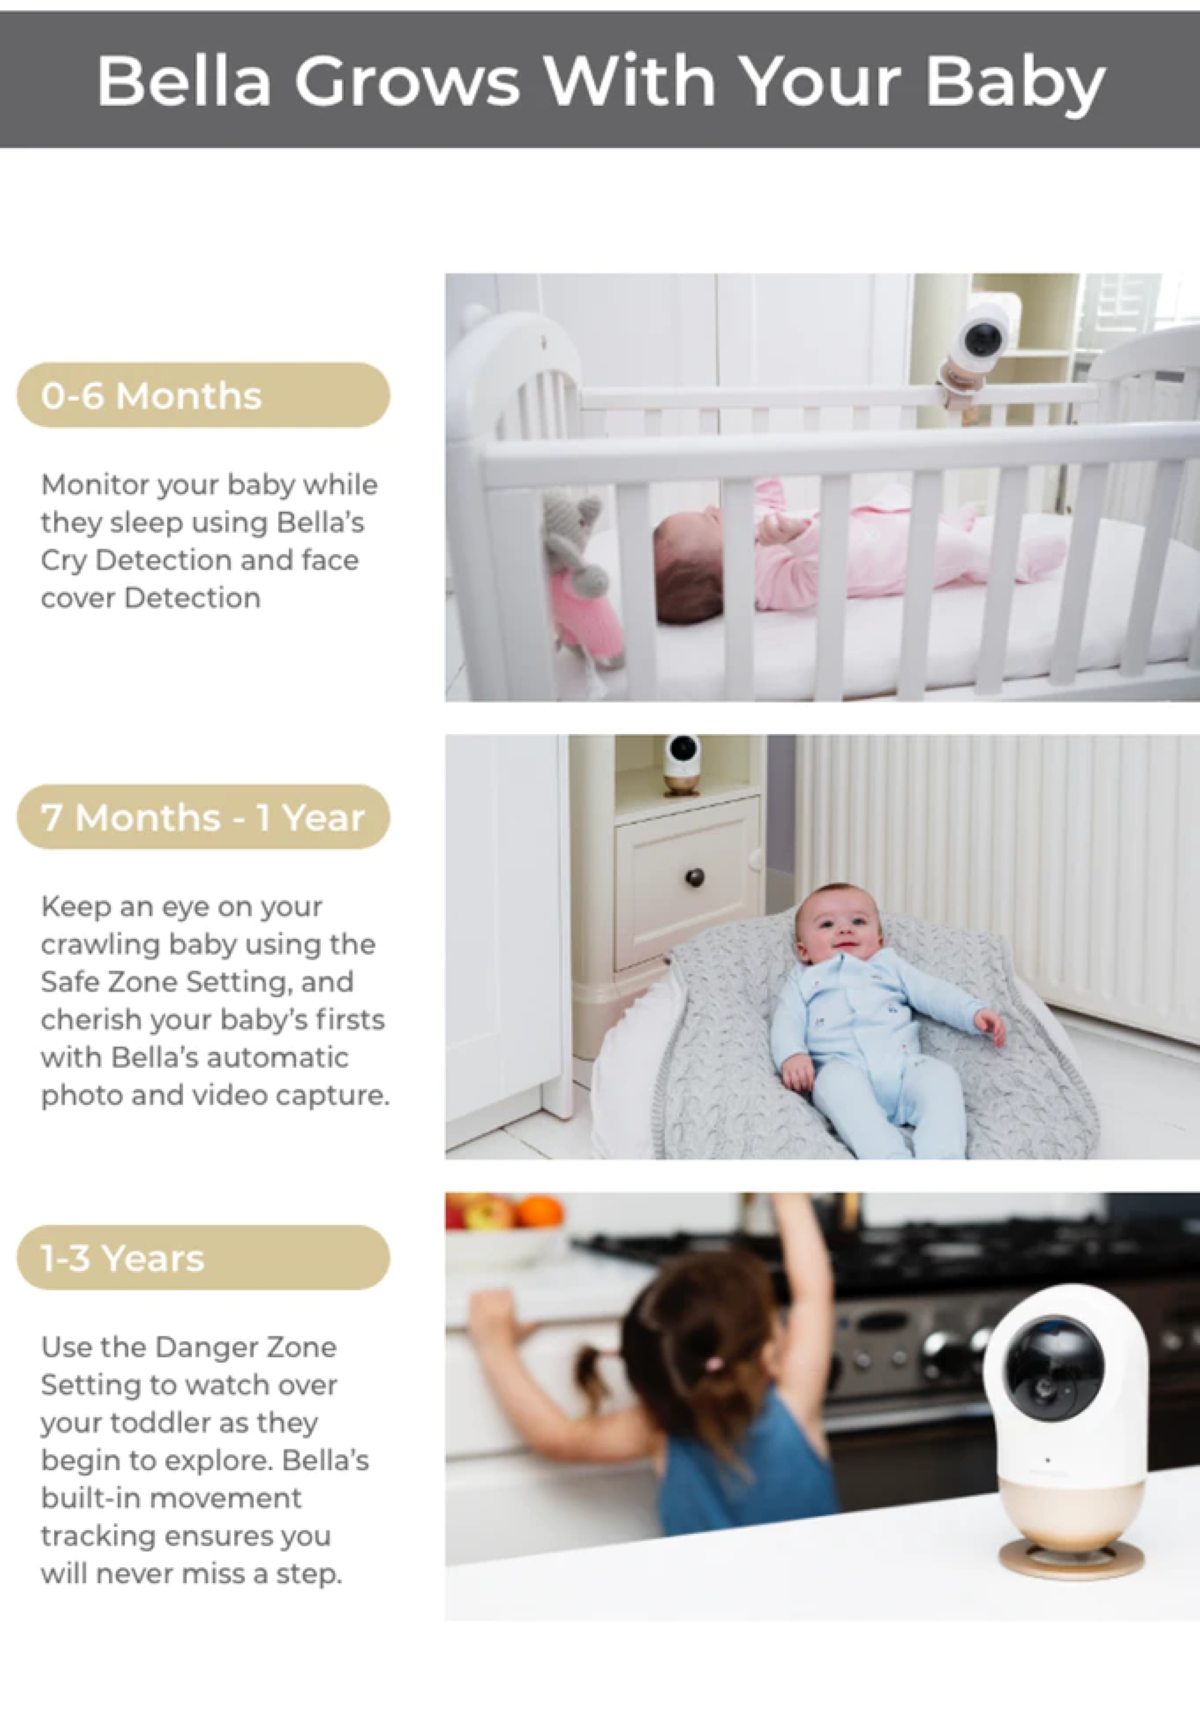 Bella Grows with Your Baby - From Baby to Toddler